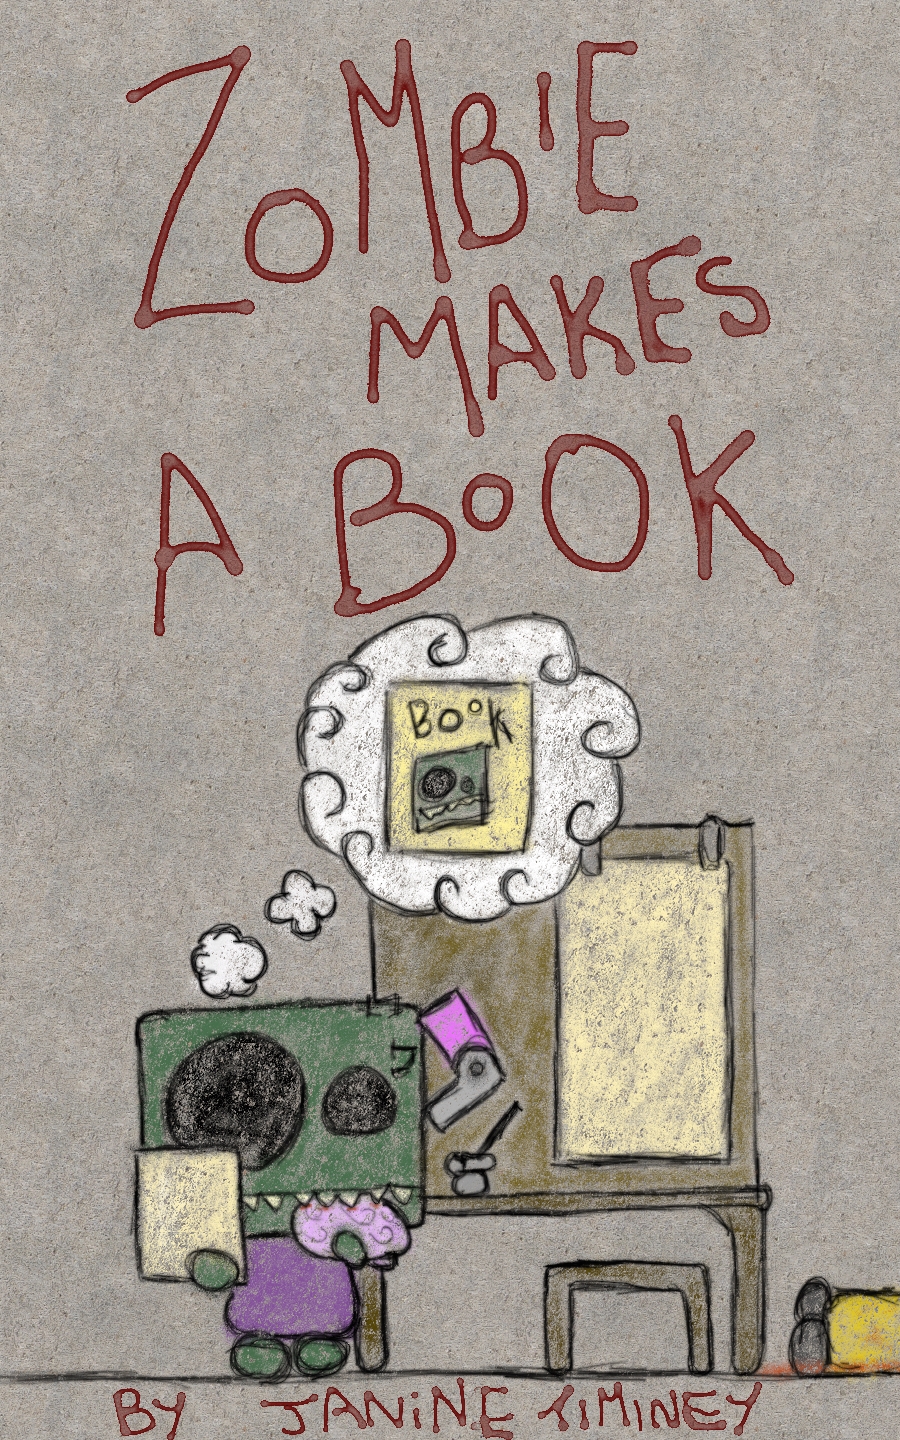 WhAts ThAT ZomBie yoU HaVe A BooK 